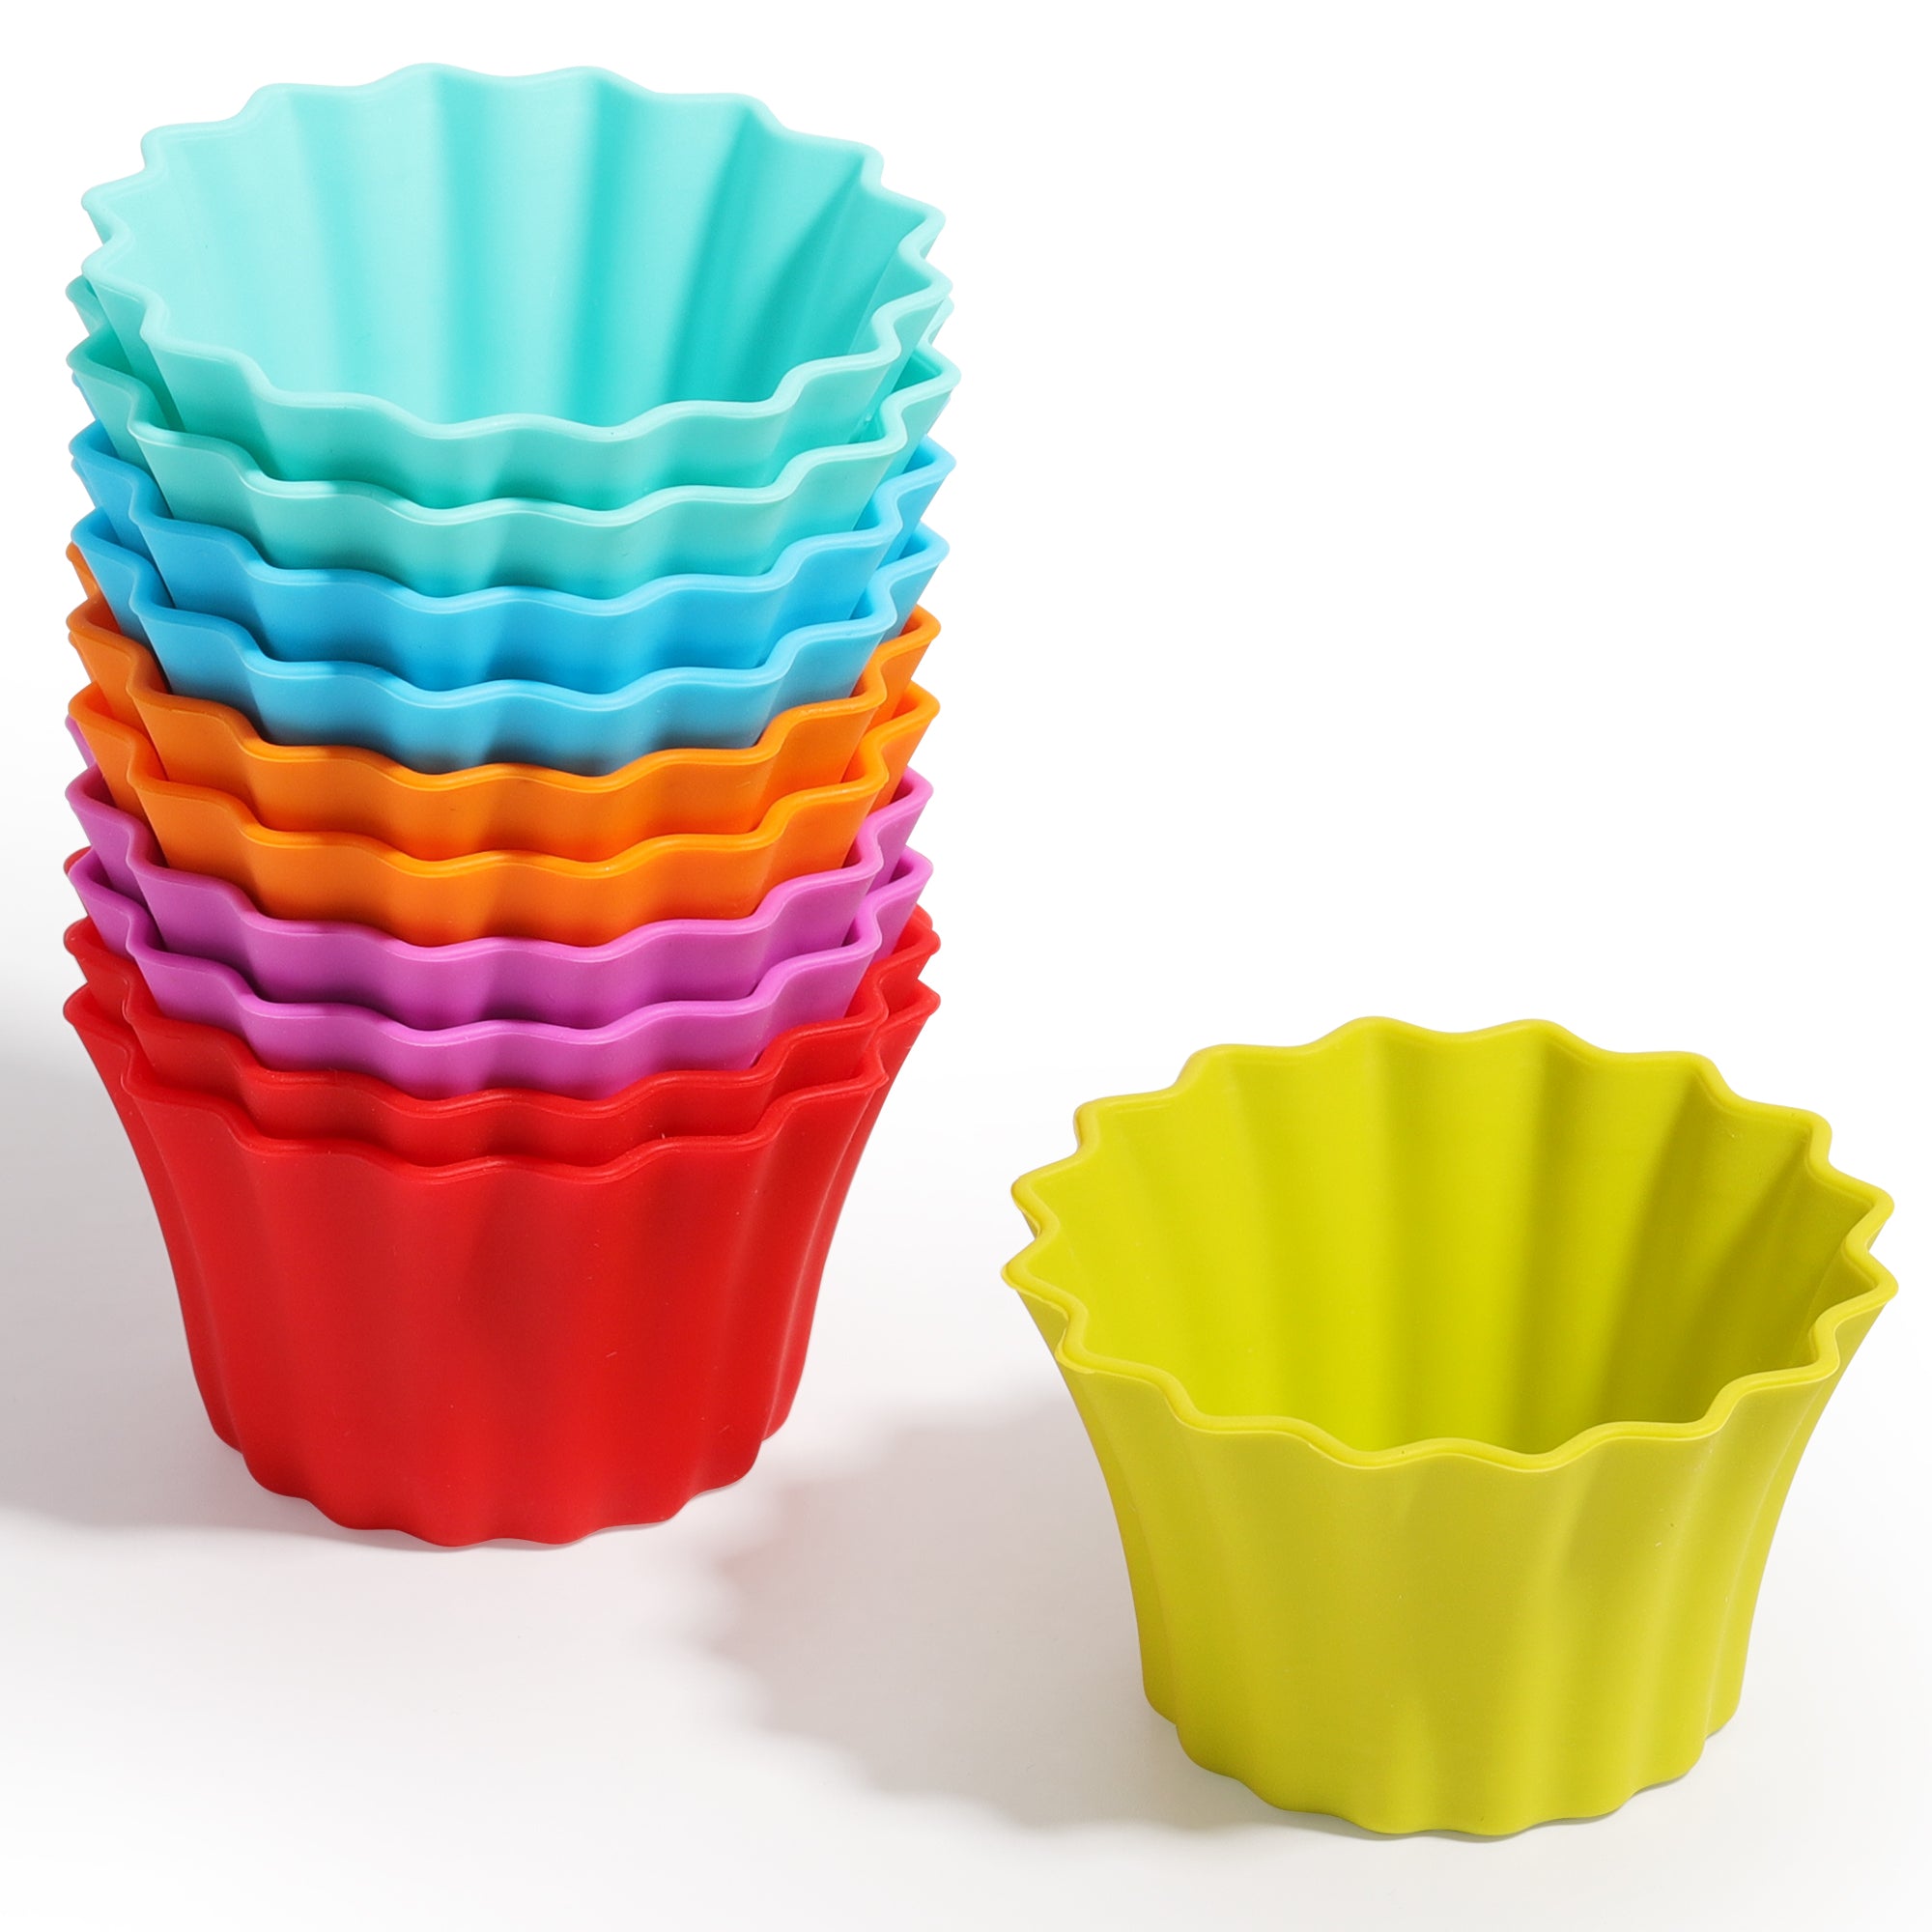 Rainbow Silicone Cupcake Liners by Kitchidy - How to use silicone